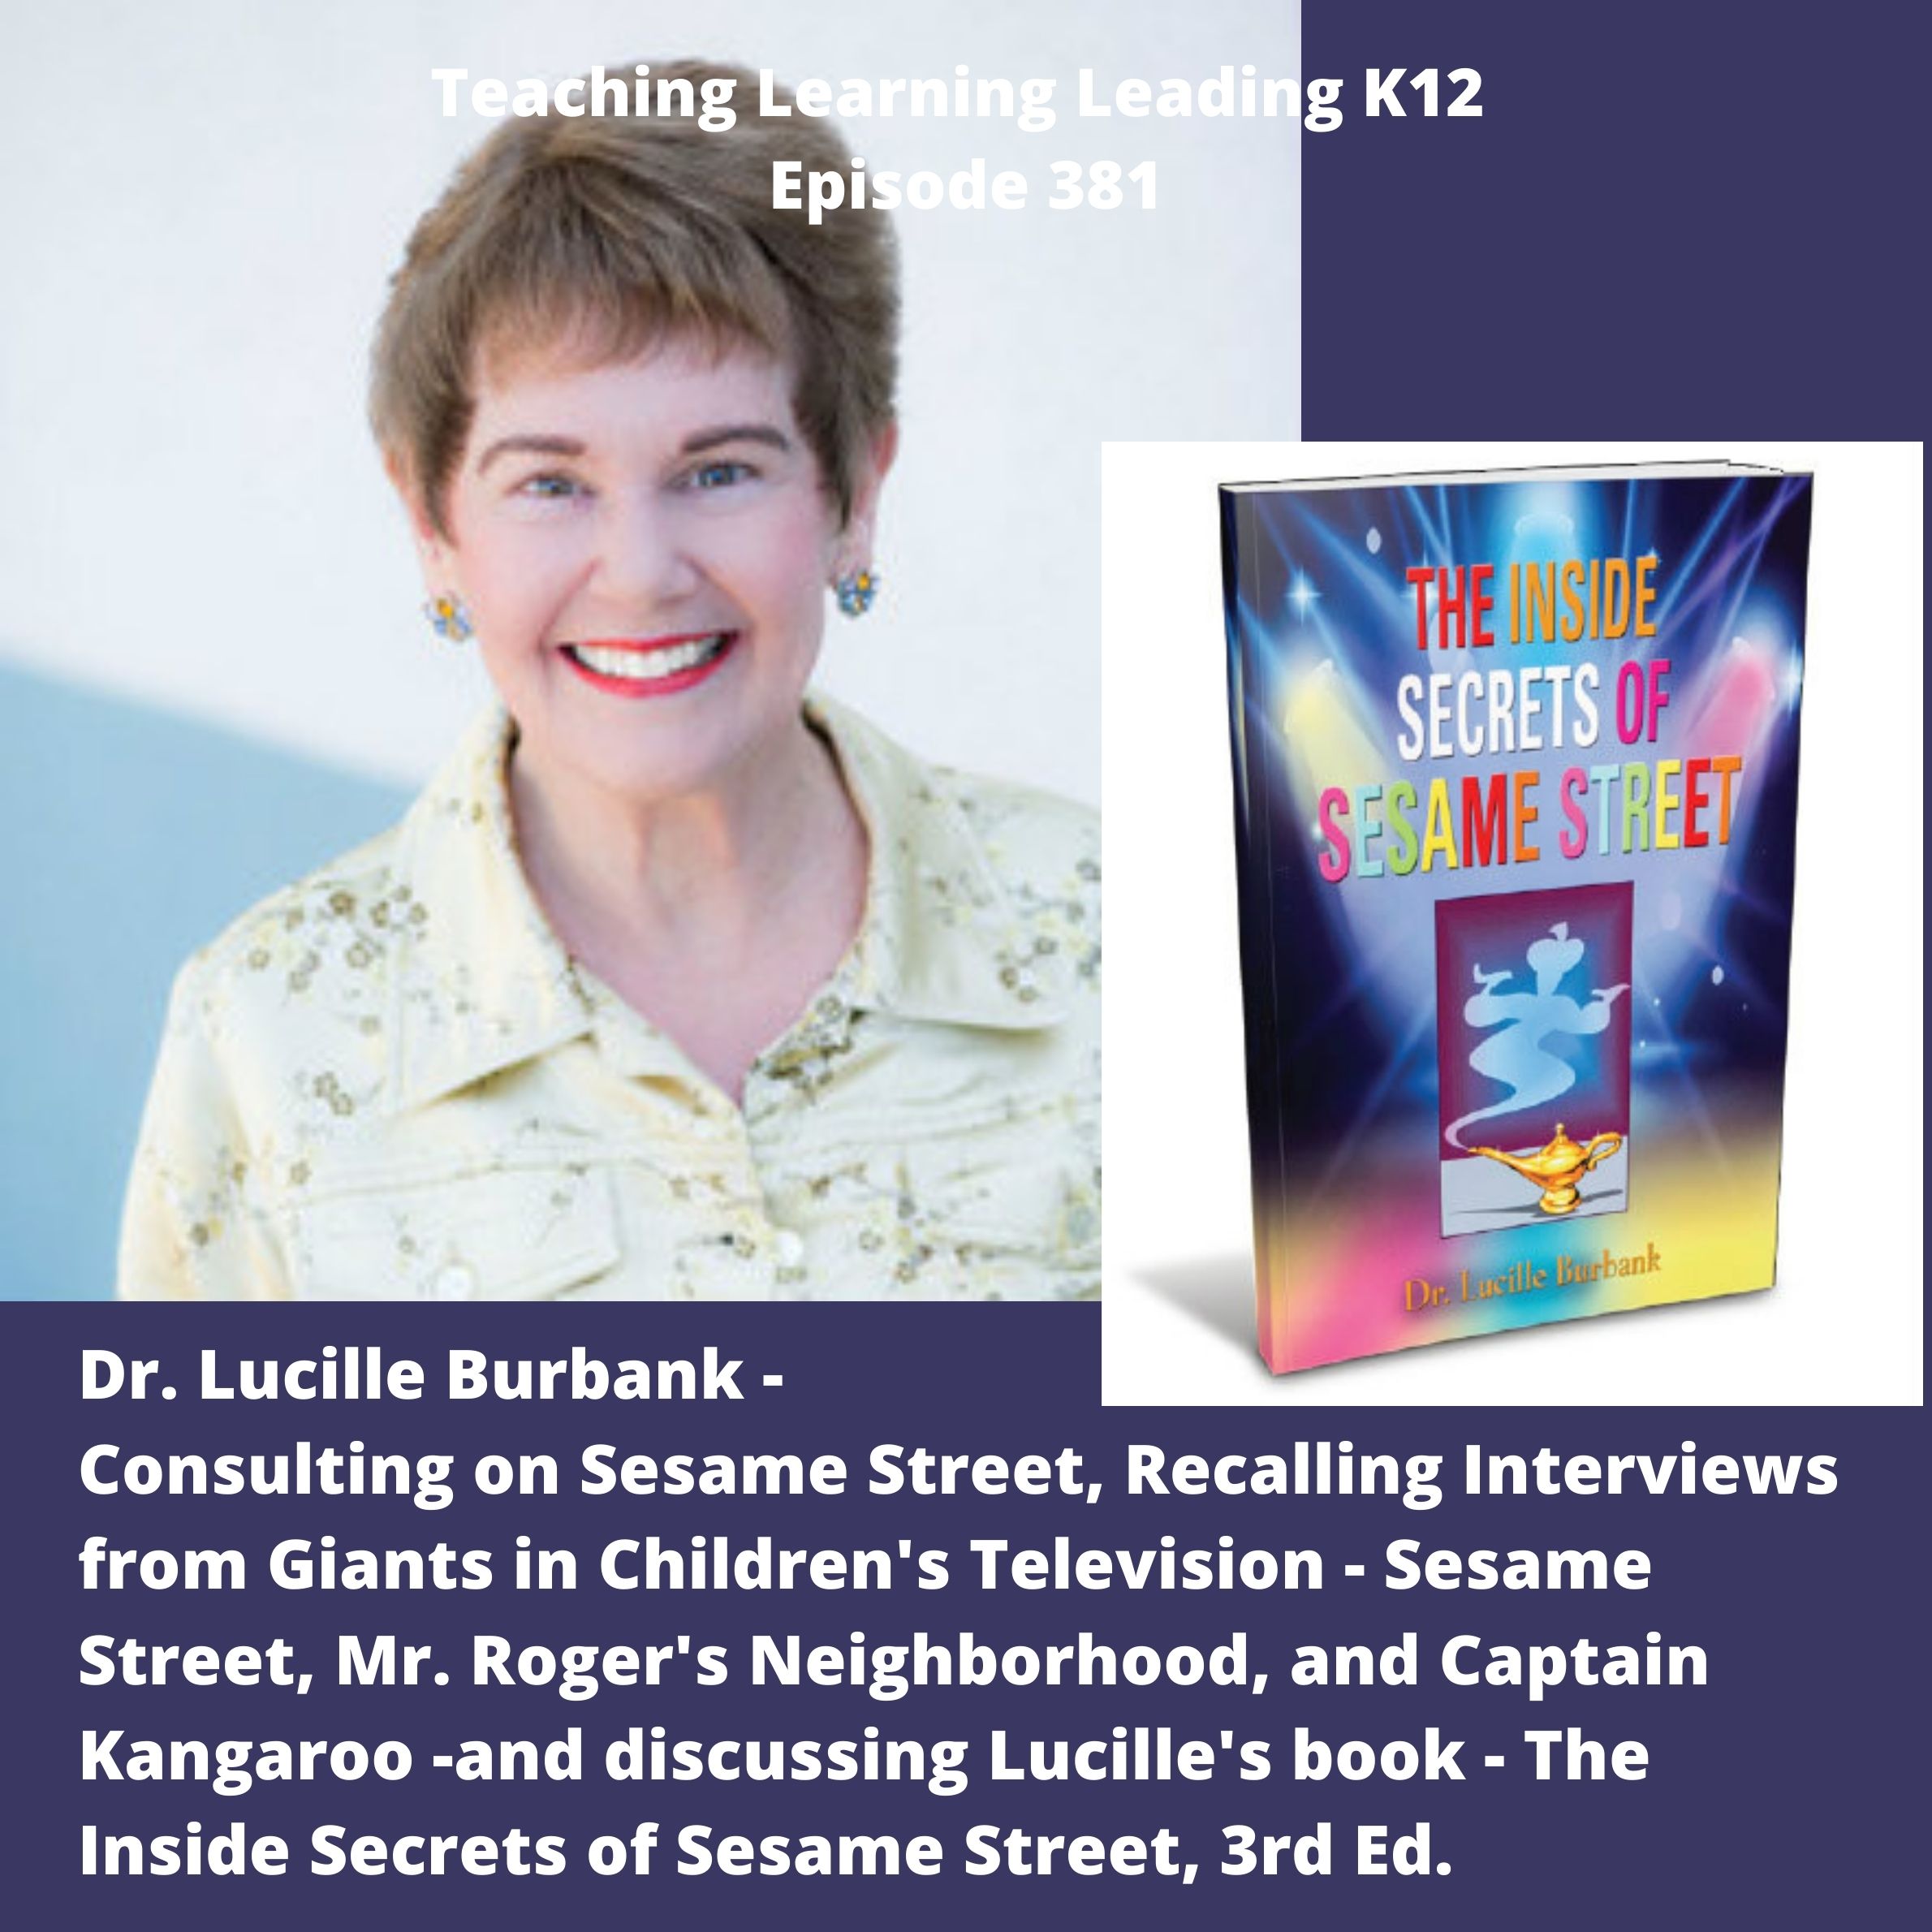 Dr. Lucille Burbank -  Being a Consultant on Sesame Street, Recalling Some Awesome Interviews  from Children's Television, and her book The Inside Secrets of Sesame Street, 3rd. Ed. - 381